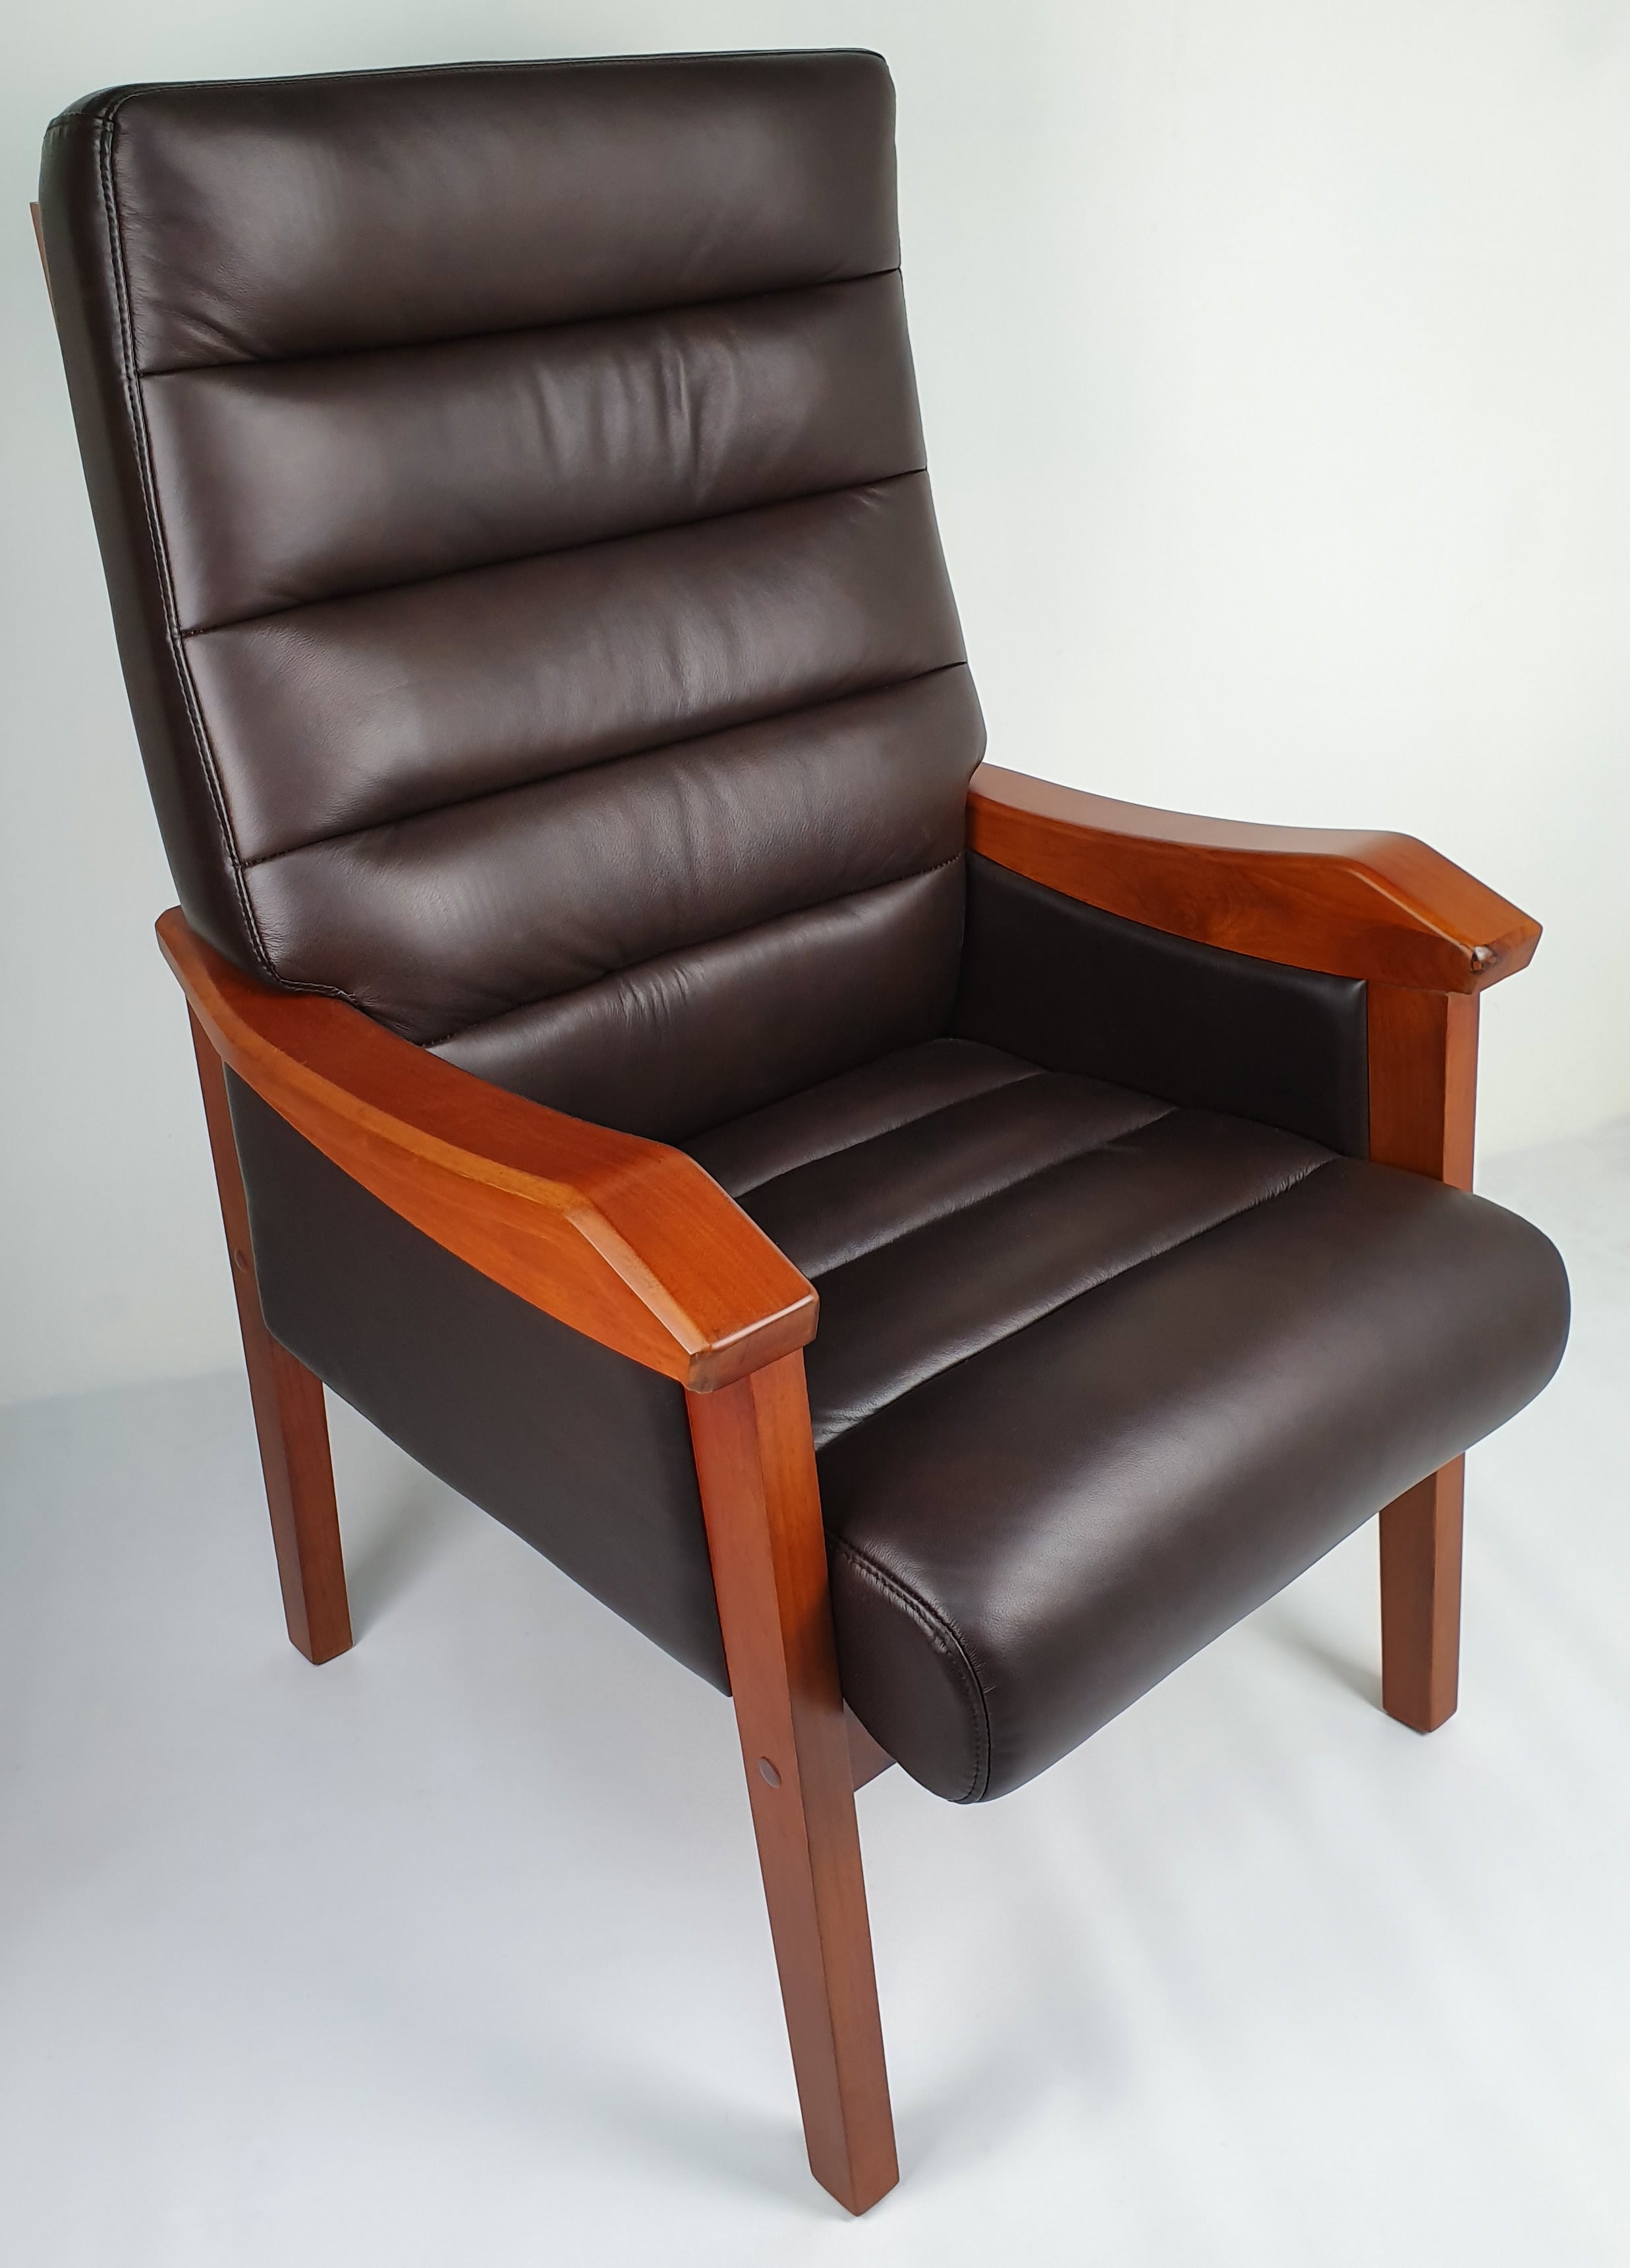 Senato CHA-FK8C Visitor Chair Brown Leather with Teak Frame Near Me